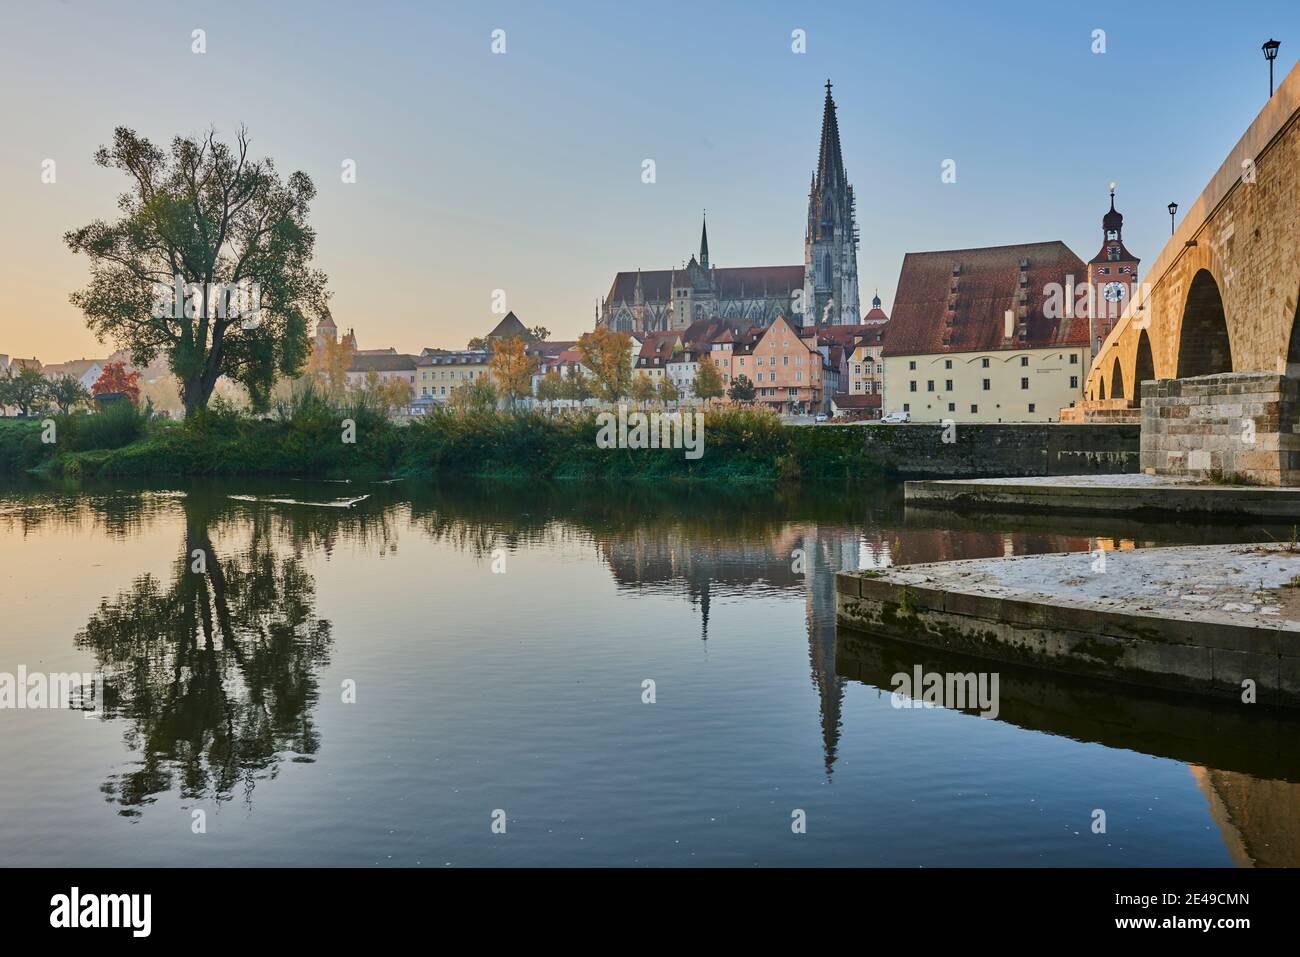 Stone bridge over Danube and old town with cathedral from Jahninsel, Regensburg, Upper Palatinate, Bavaria, Germany Stock Photo